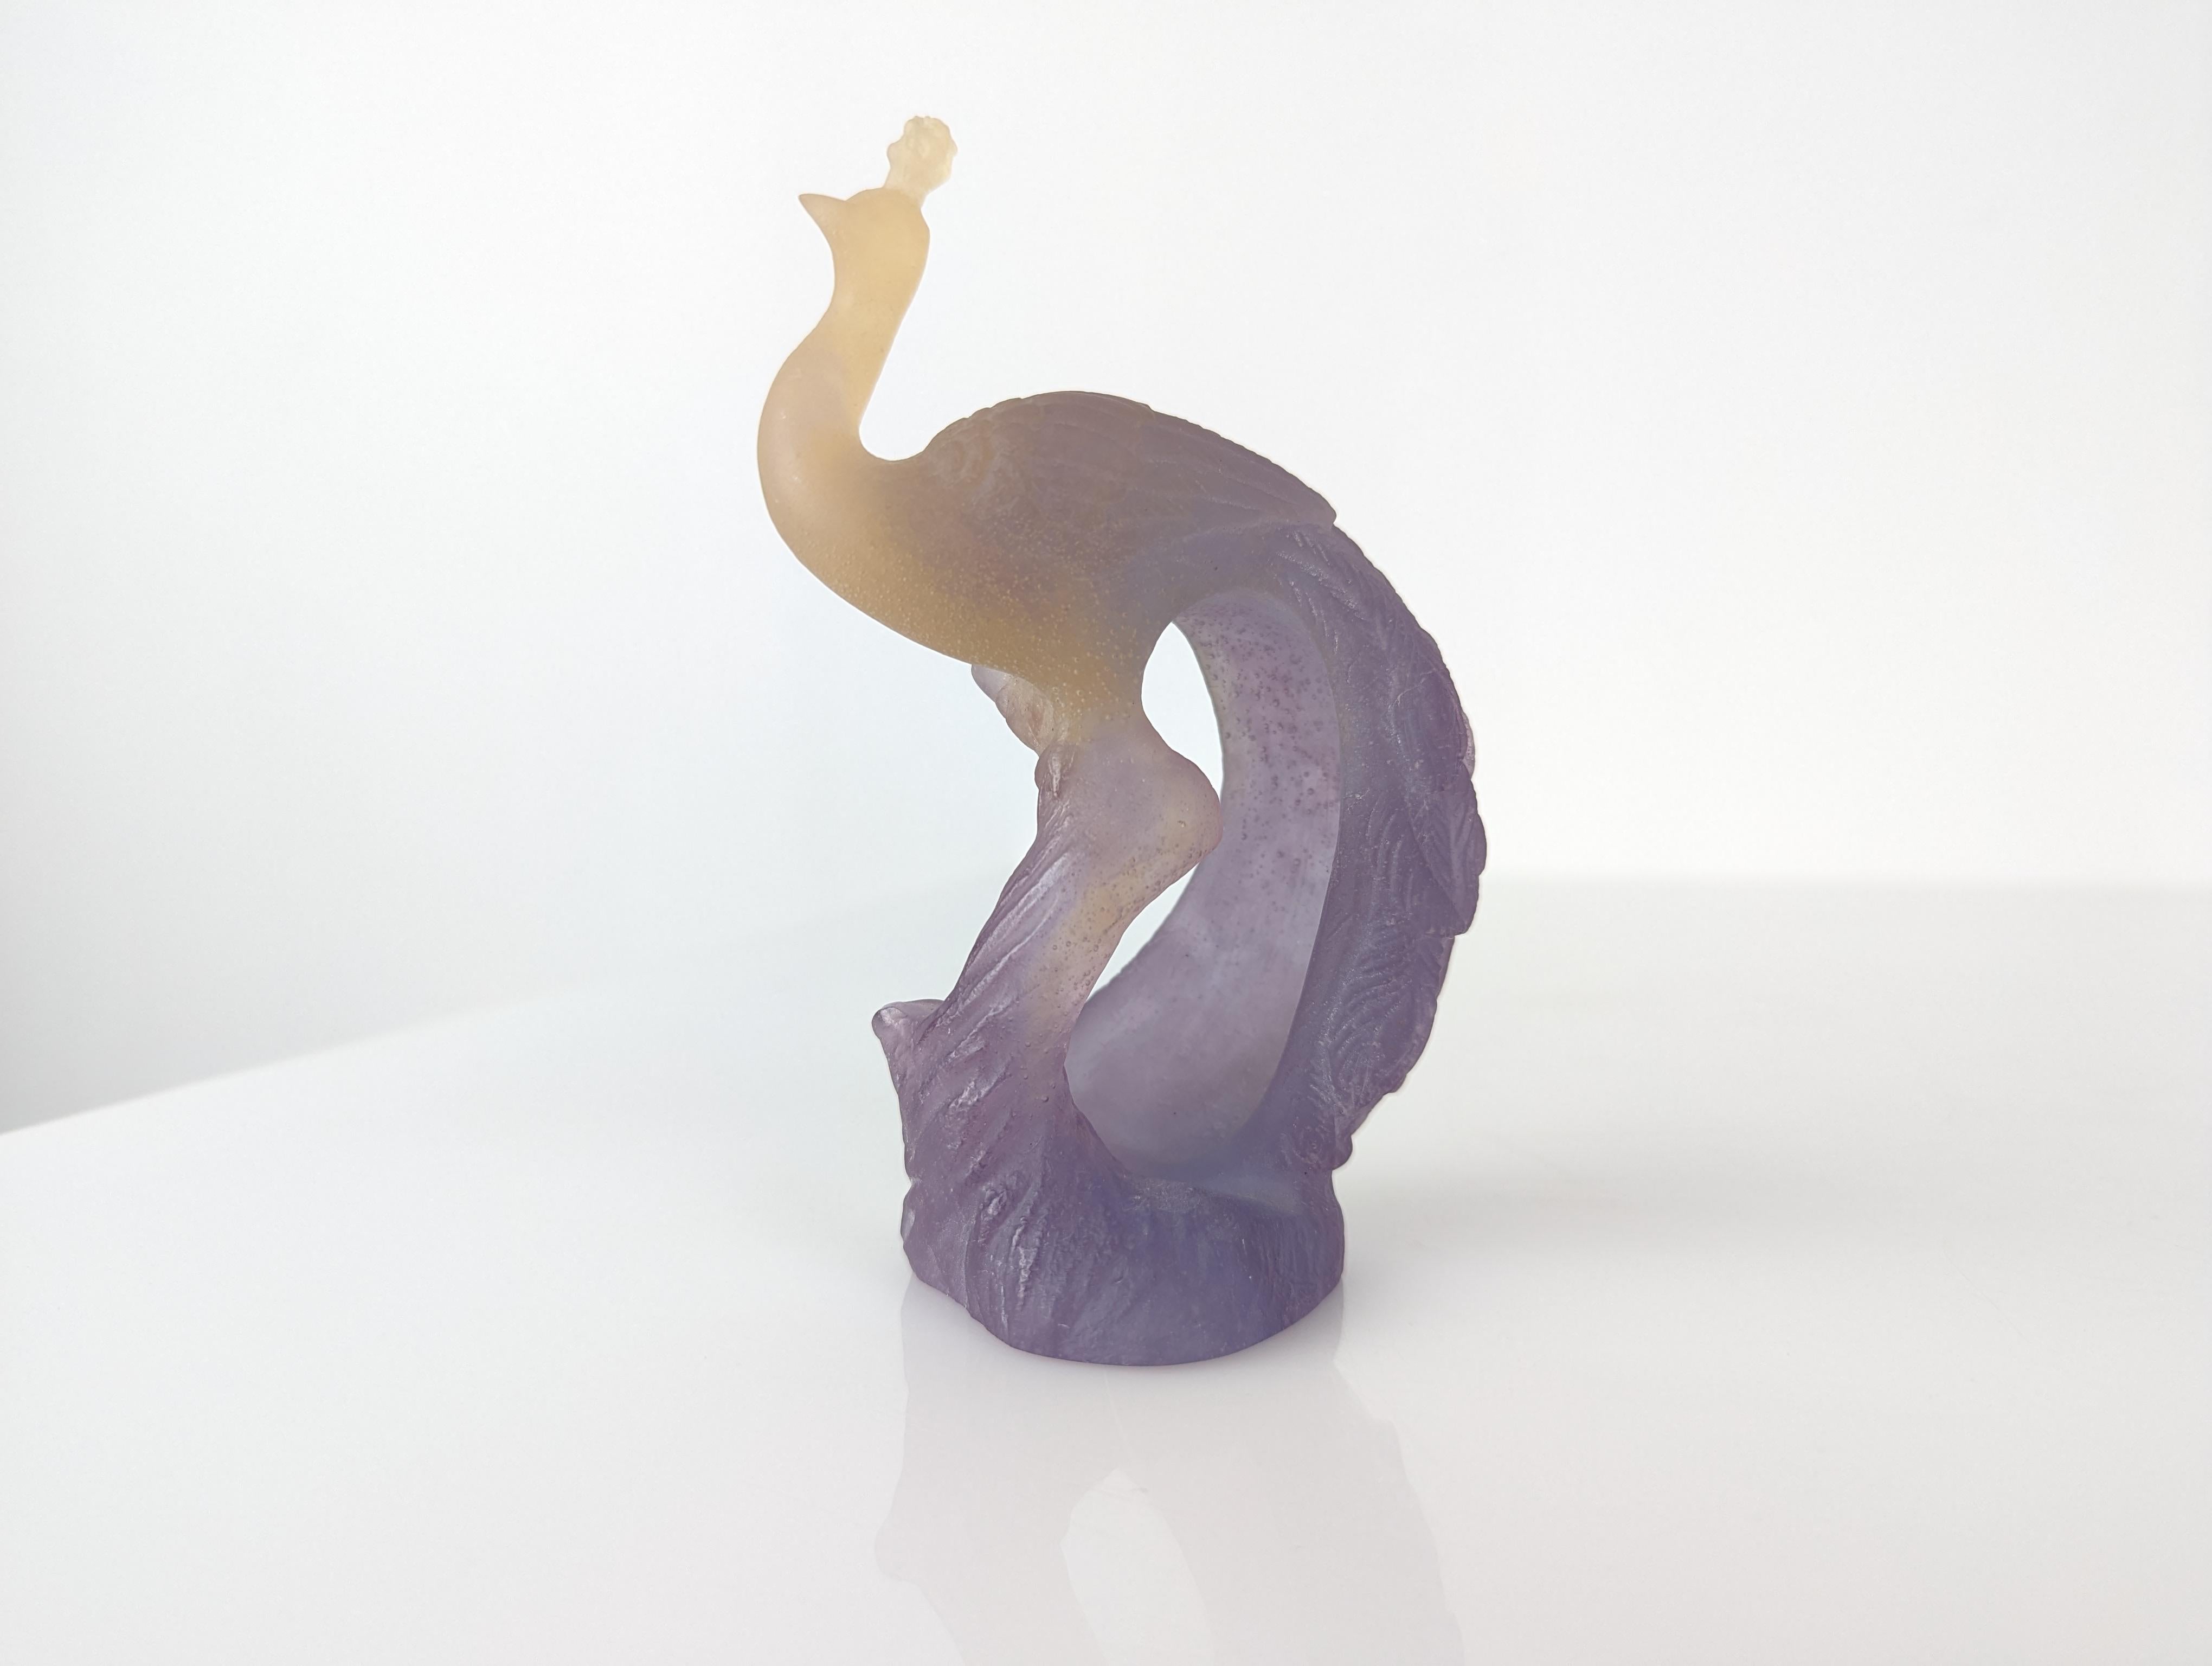 Sculpture made in pate de verre by the prestigious French house Daum during the second half of the 20th century in beautiful purple and orange tones. signed at the base Daum France.